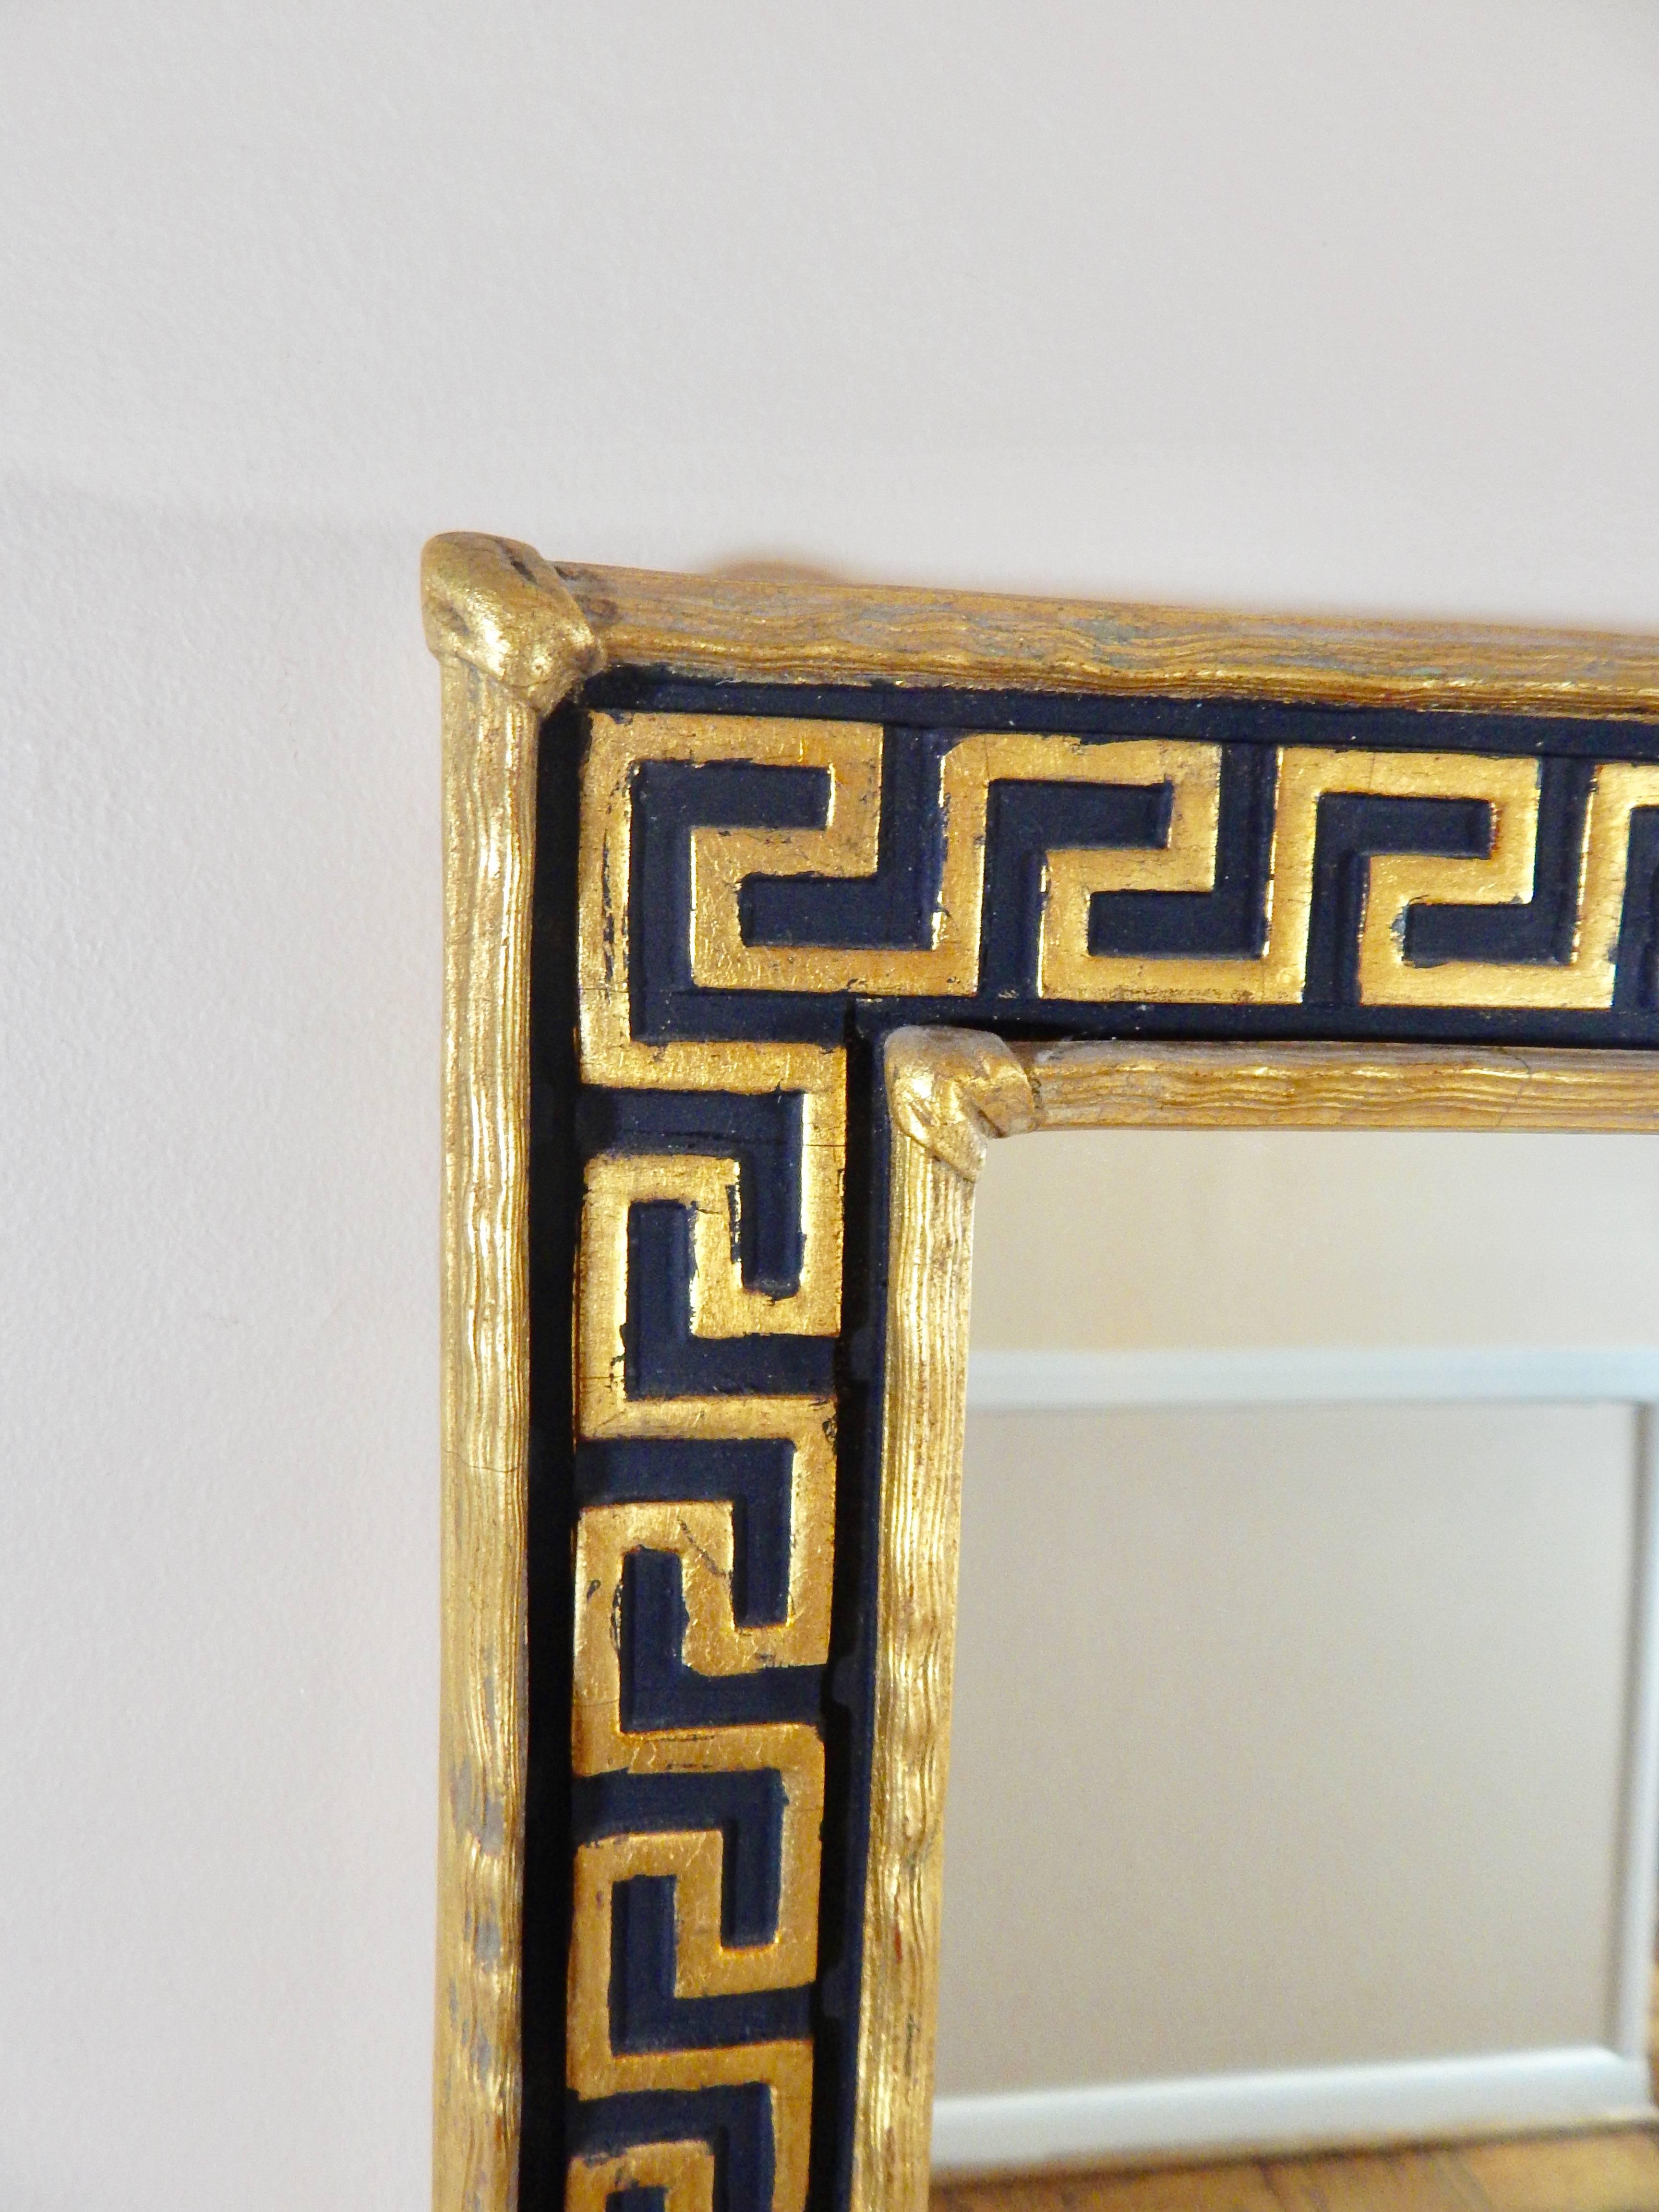 1960s Mid-Century giltleaf and black Greek Key mirror. Excellent condition.

We offer Complimentary shipping for this item in NYC and surrounding areas as well as some Mid Atlantic Areas. 